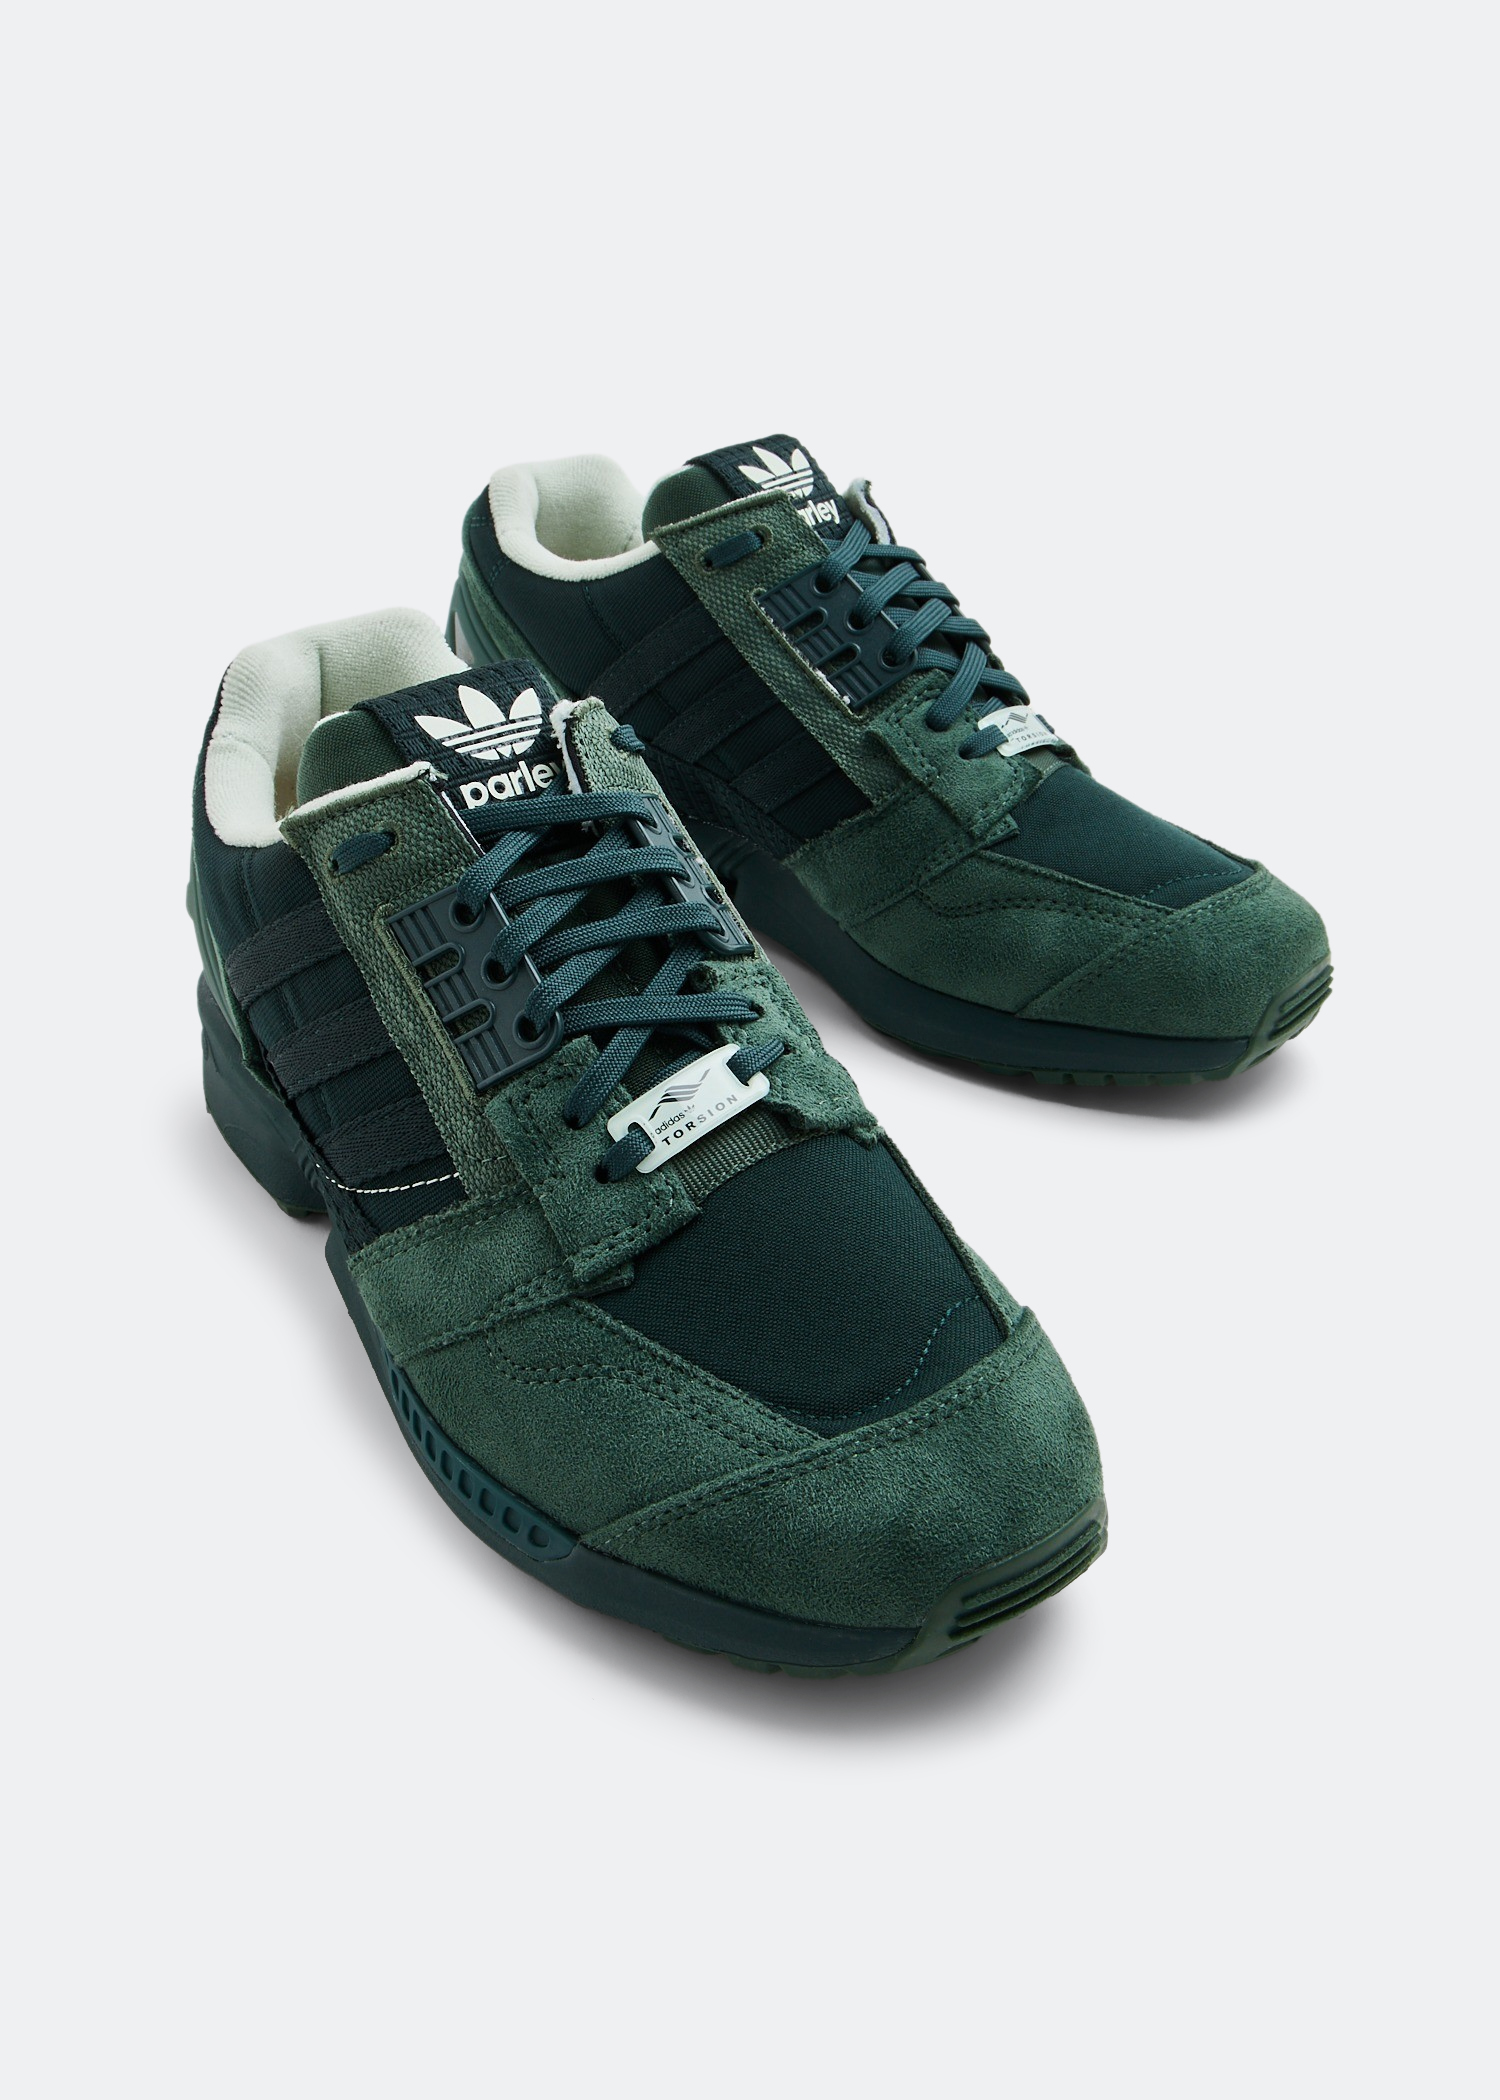 Adidas ZX 8000 Parley sneakers for Men - Green in KSA | Level Shoes